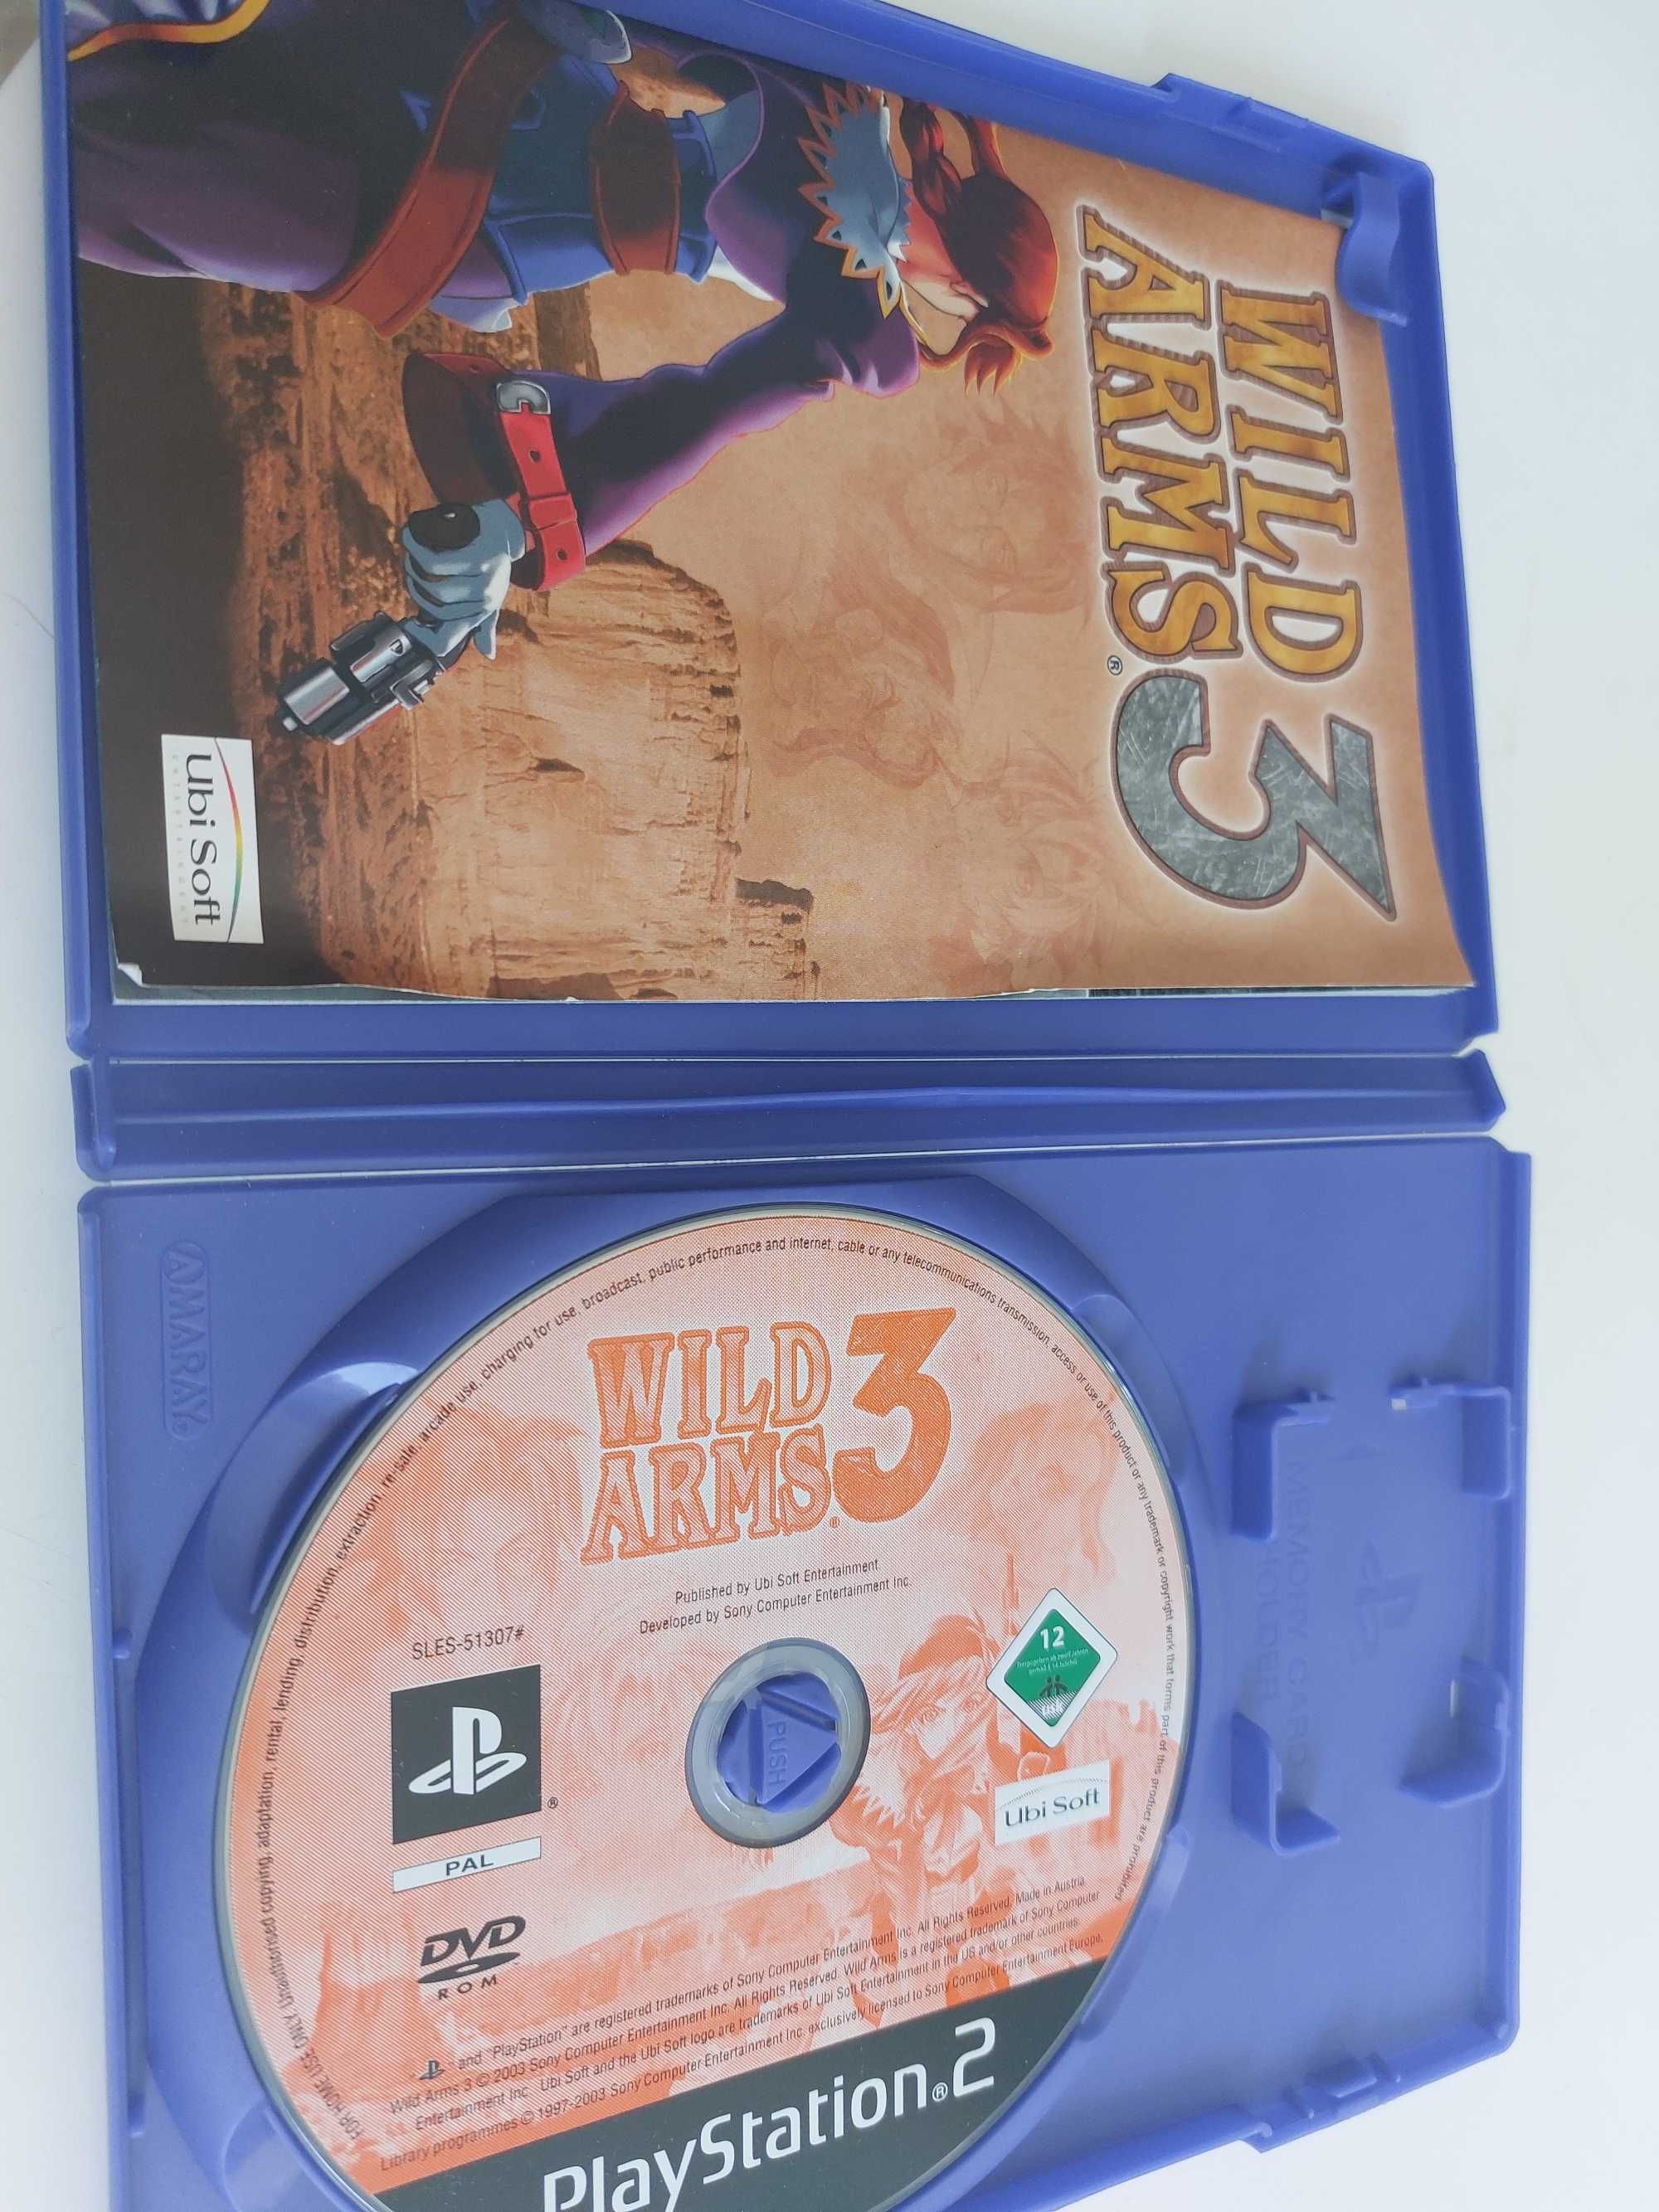 Wild Arms 3 Playstation 2 PS2